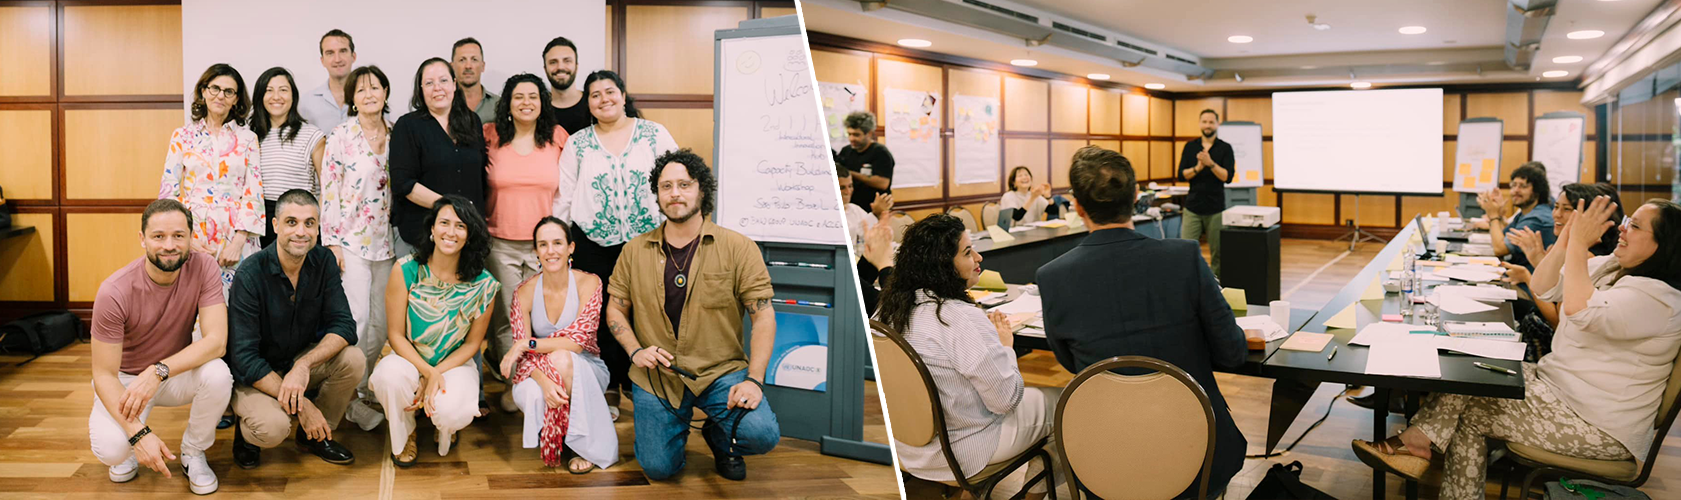 Intercultural Innovation Hub in Action: Capacity-Building Workshop in São Paulo, Brazil Expands Grassroots Impact of Recipient Organizations